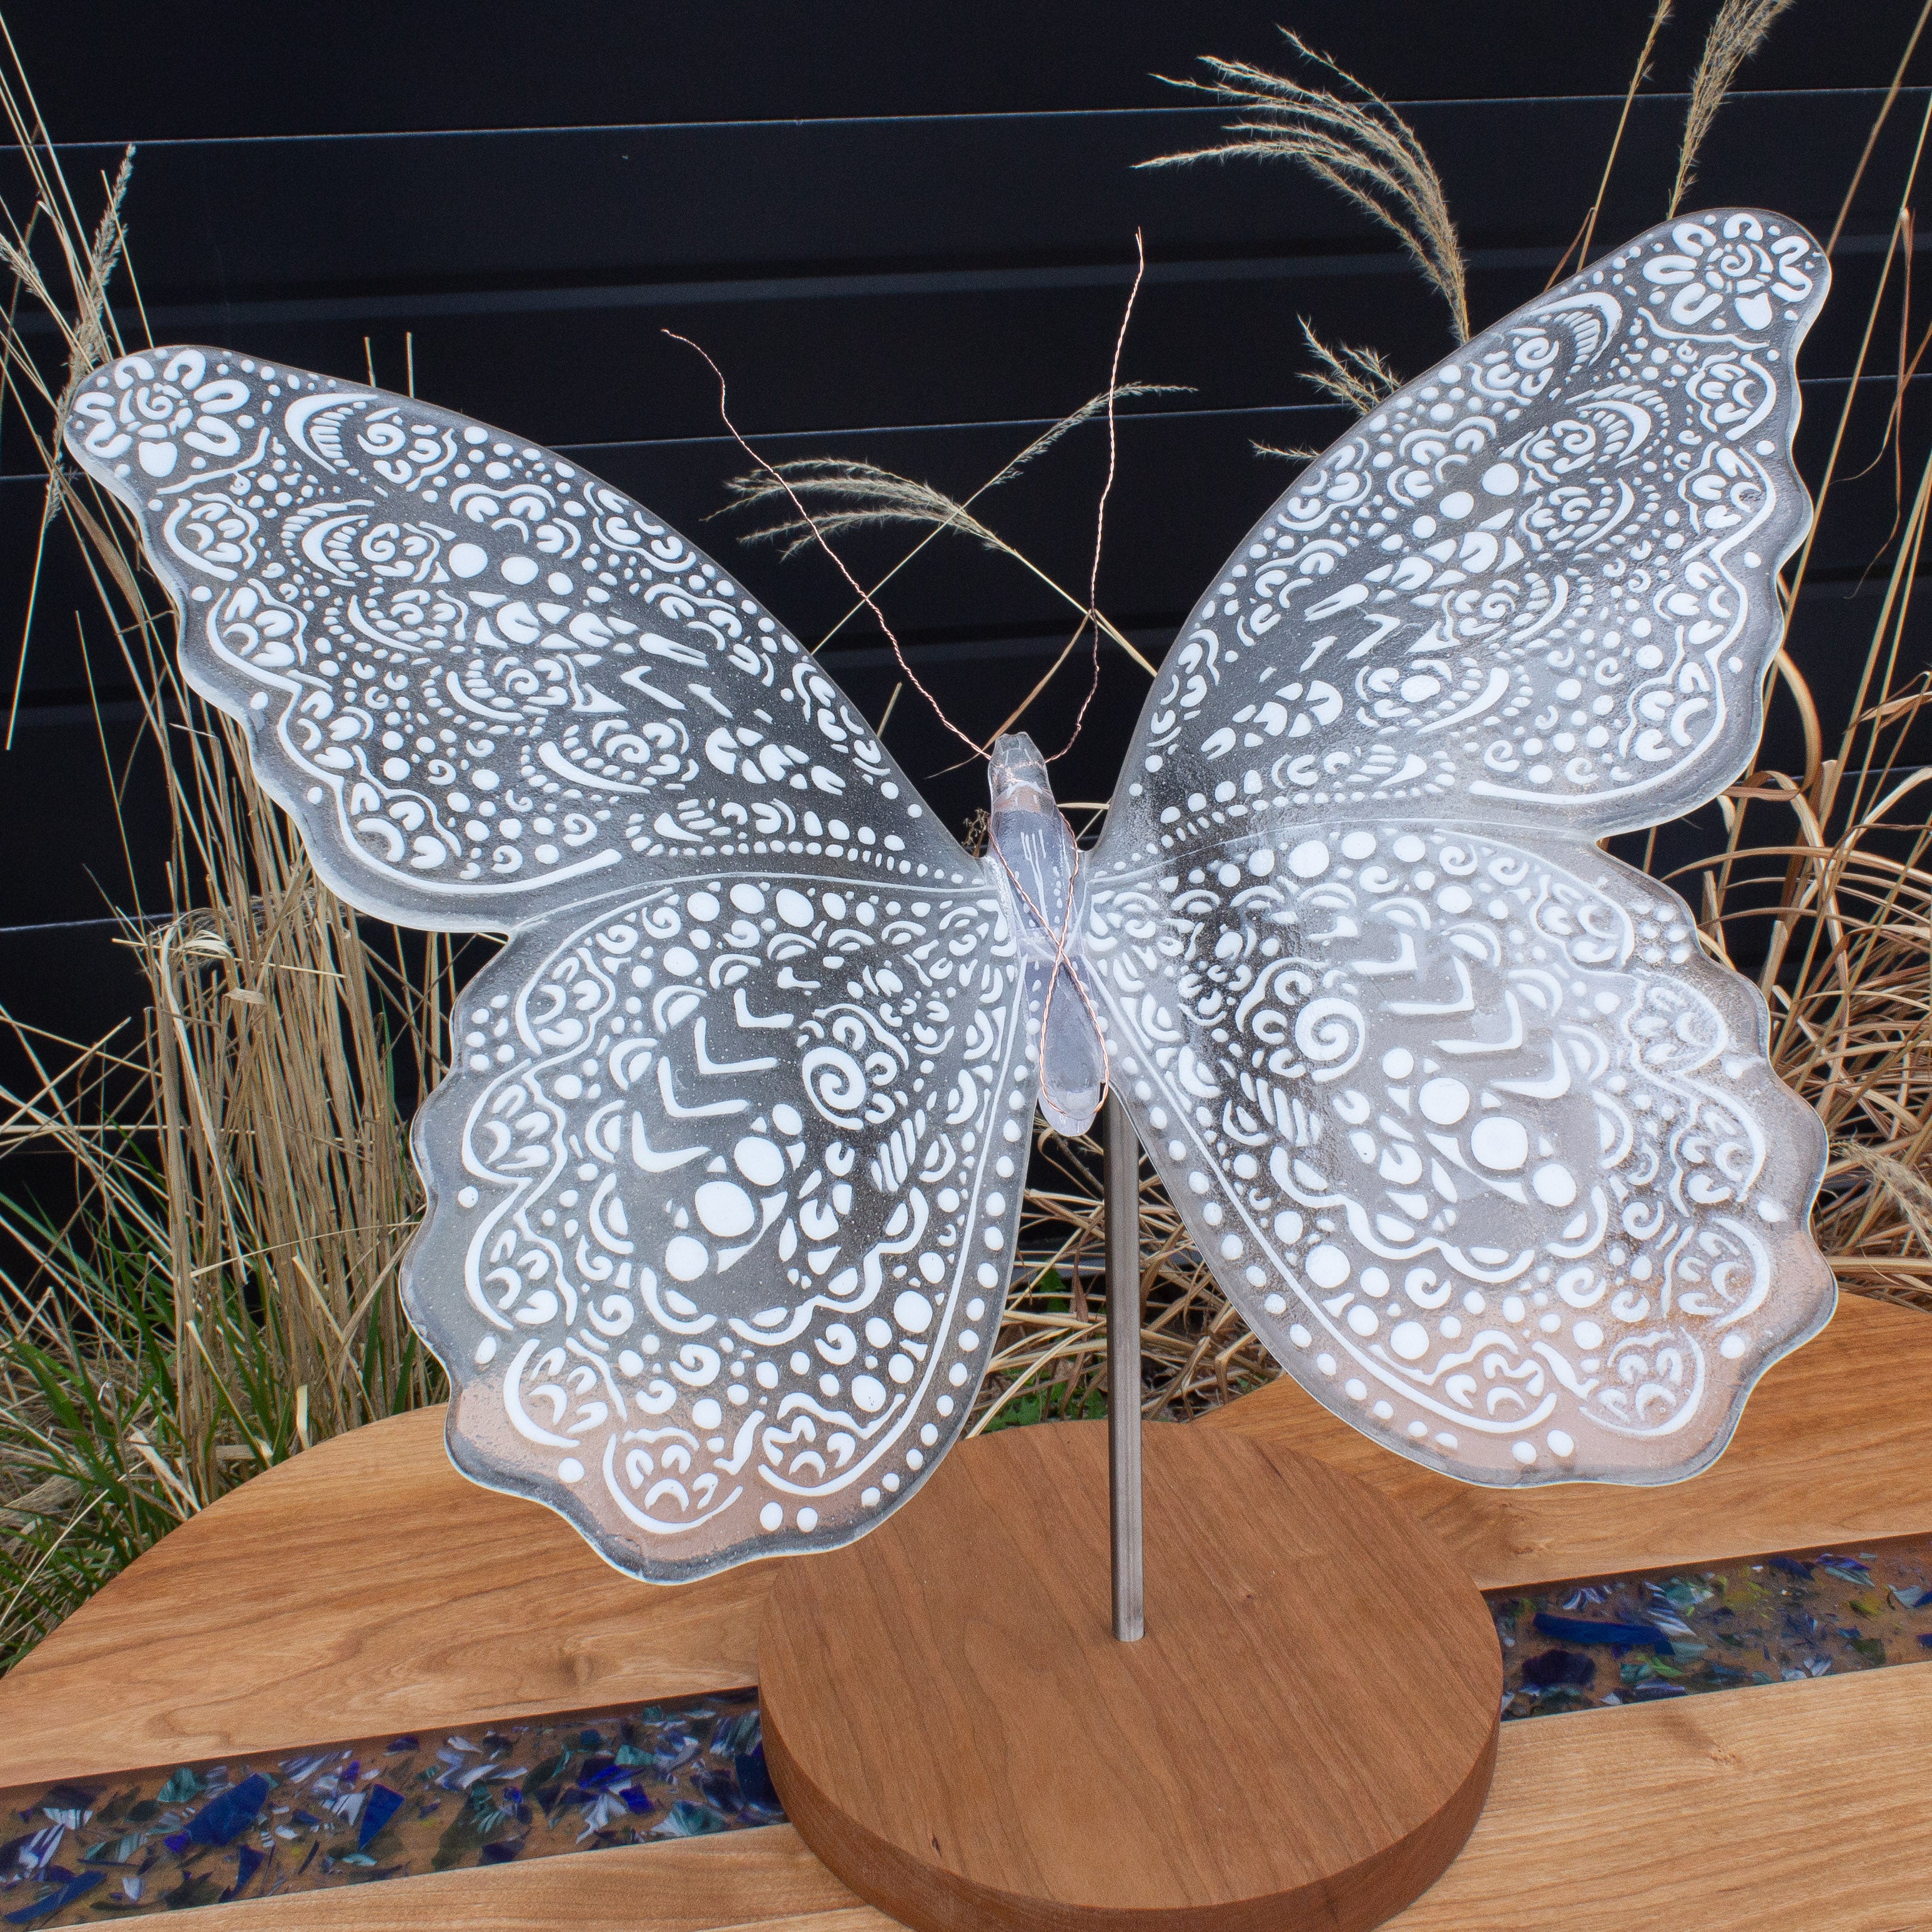 Large White Butterfly Sculpture